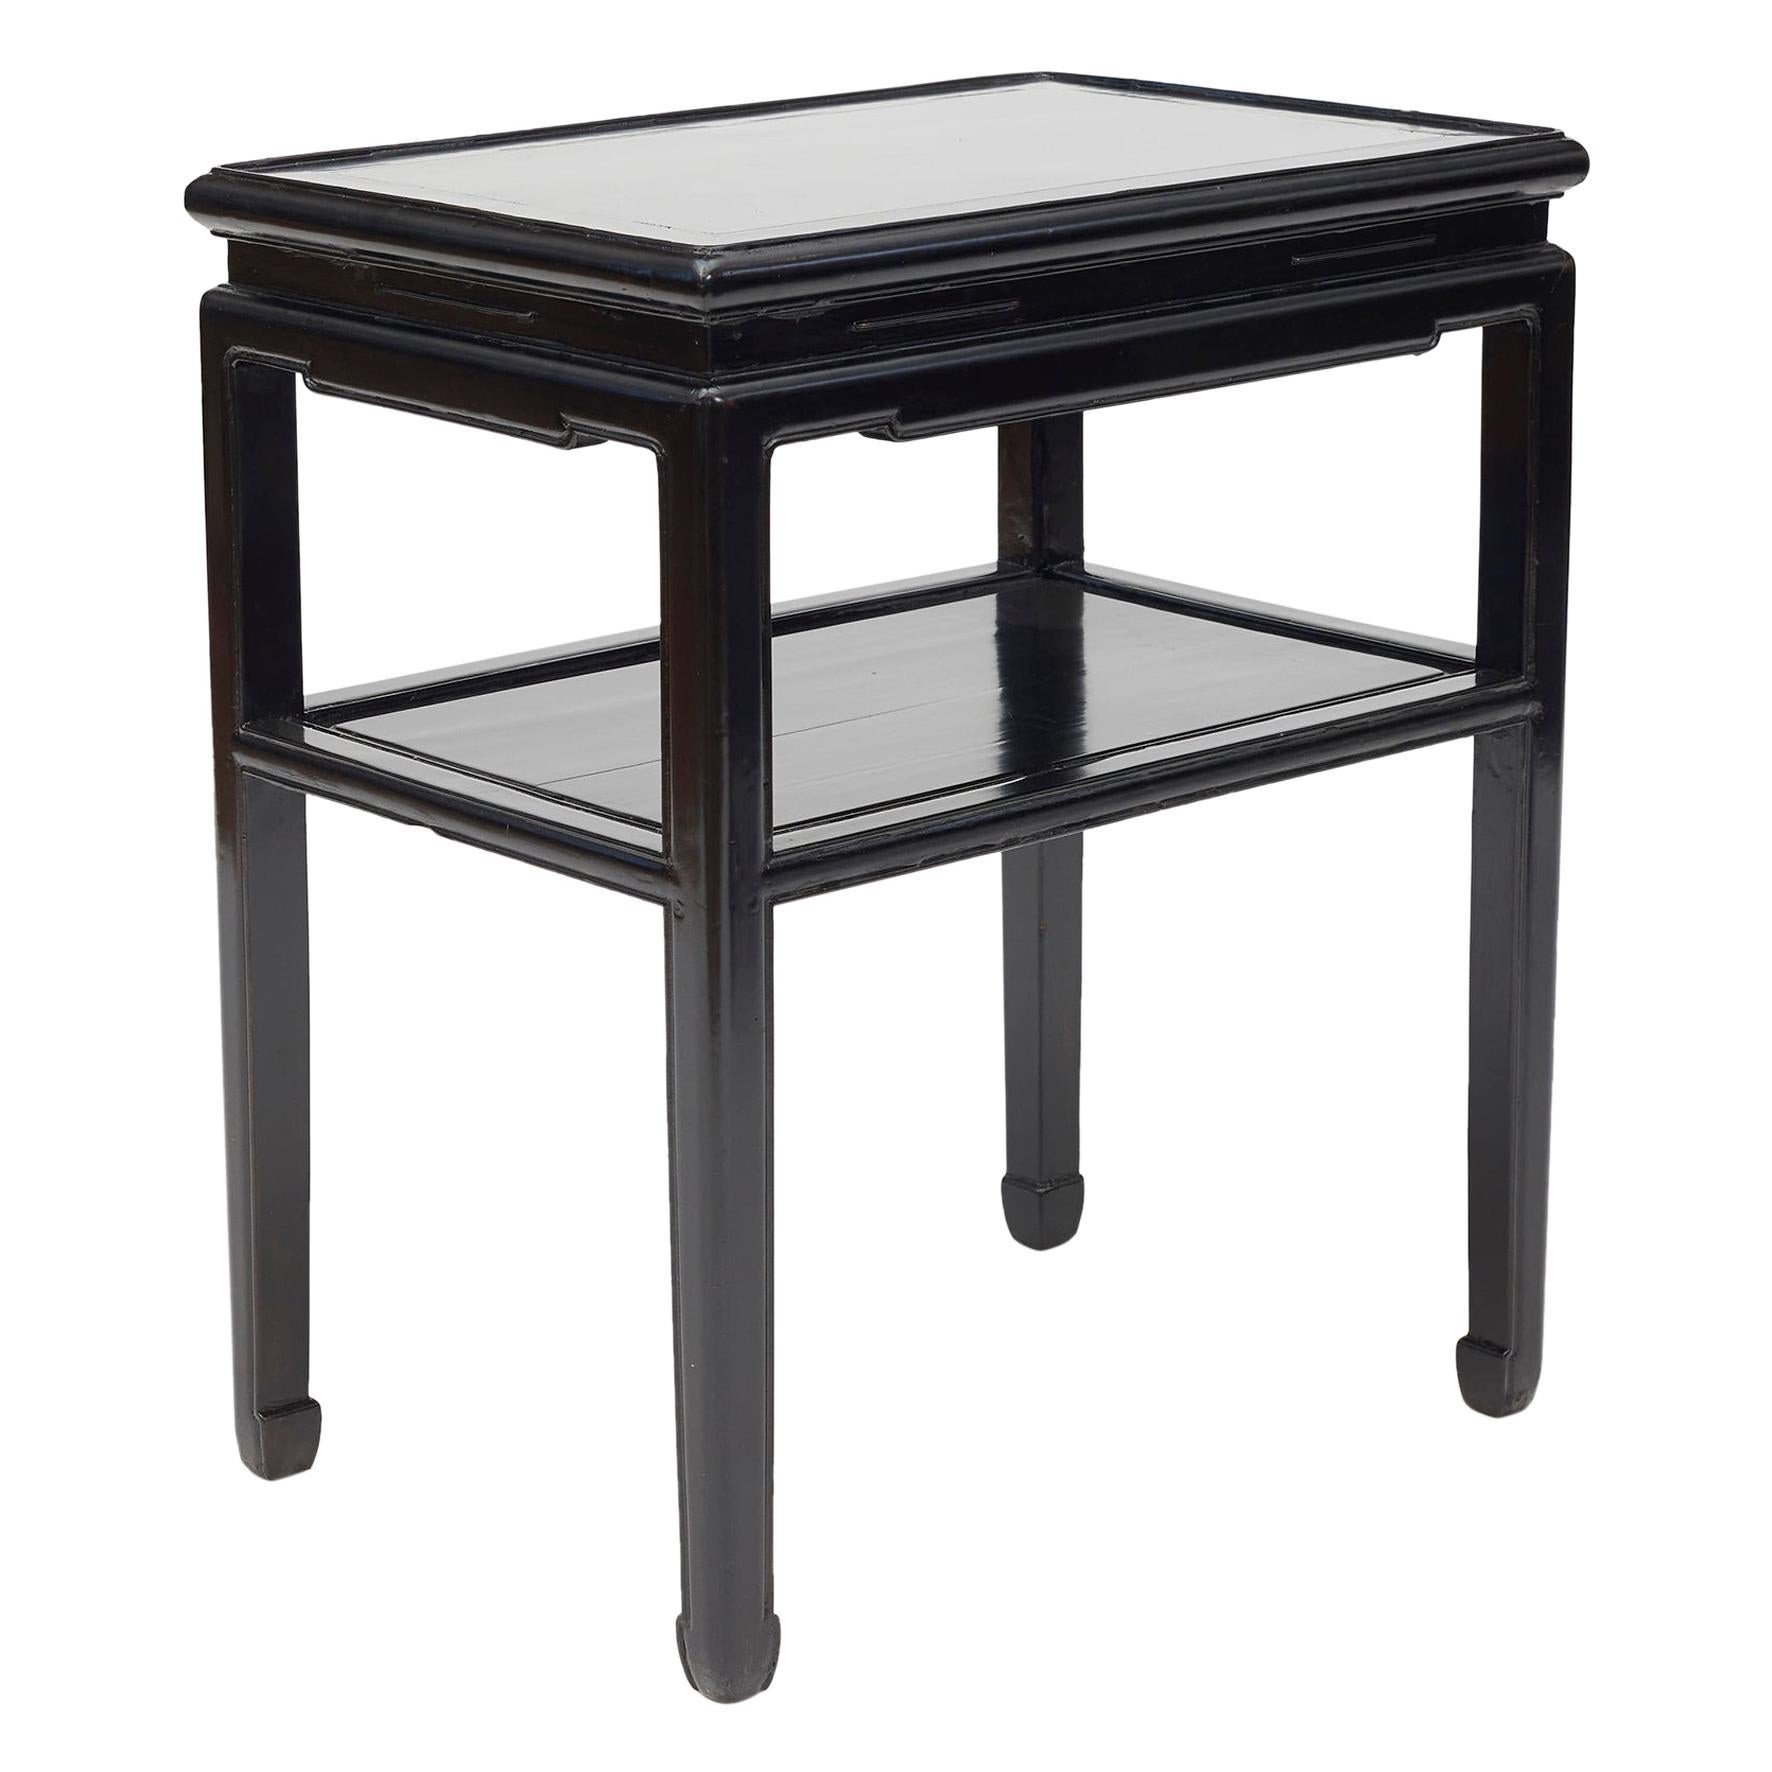 Chinese Black Lacquer Side Table with Shelf, circa 1920